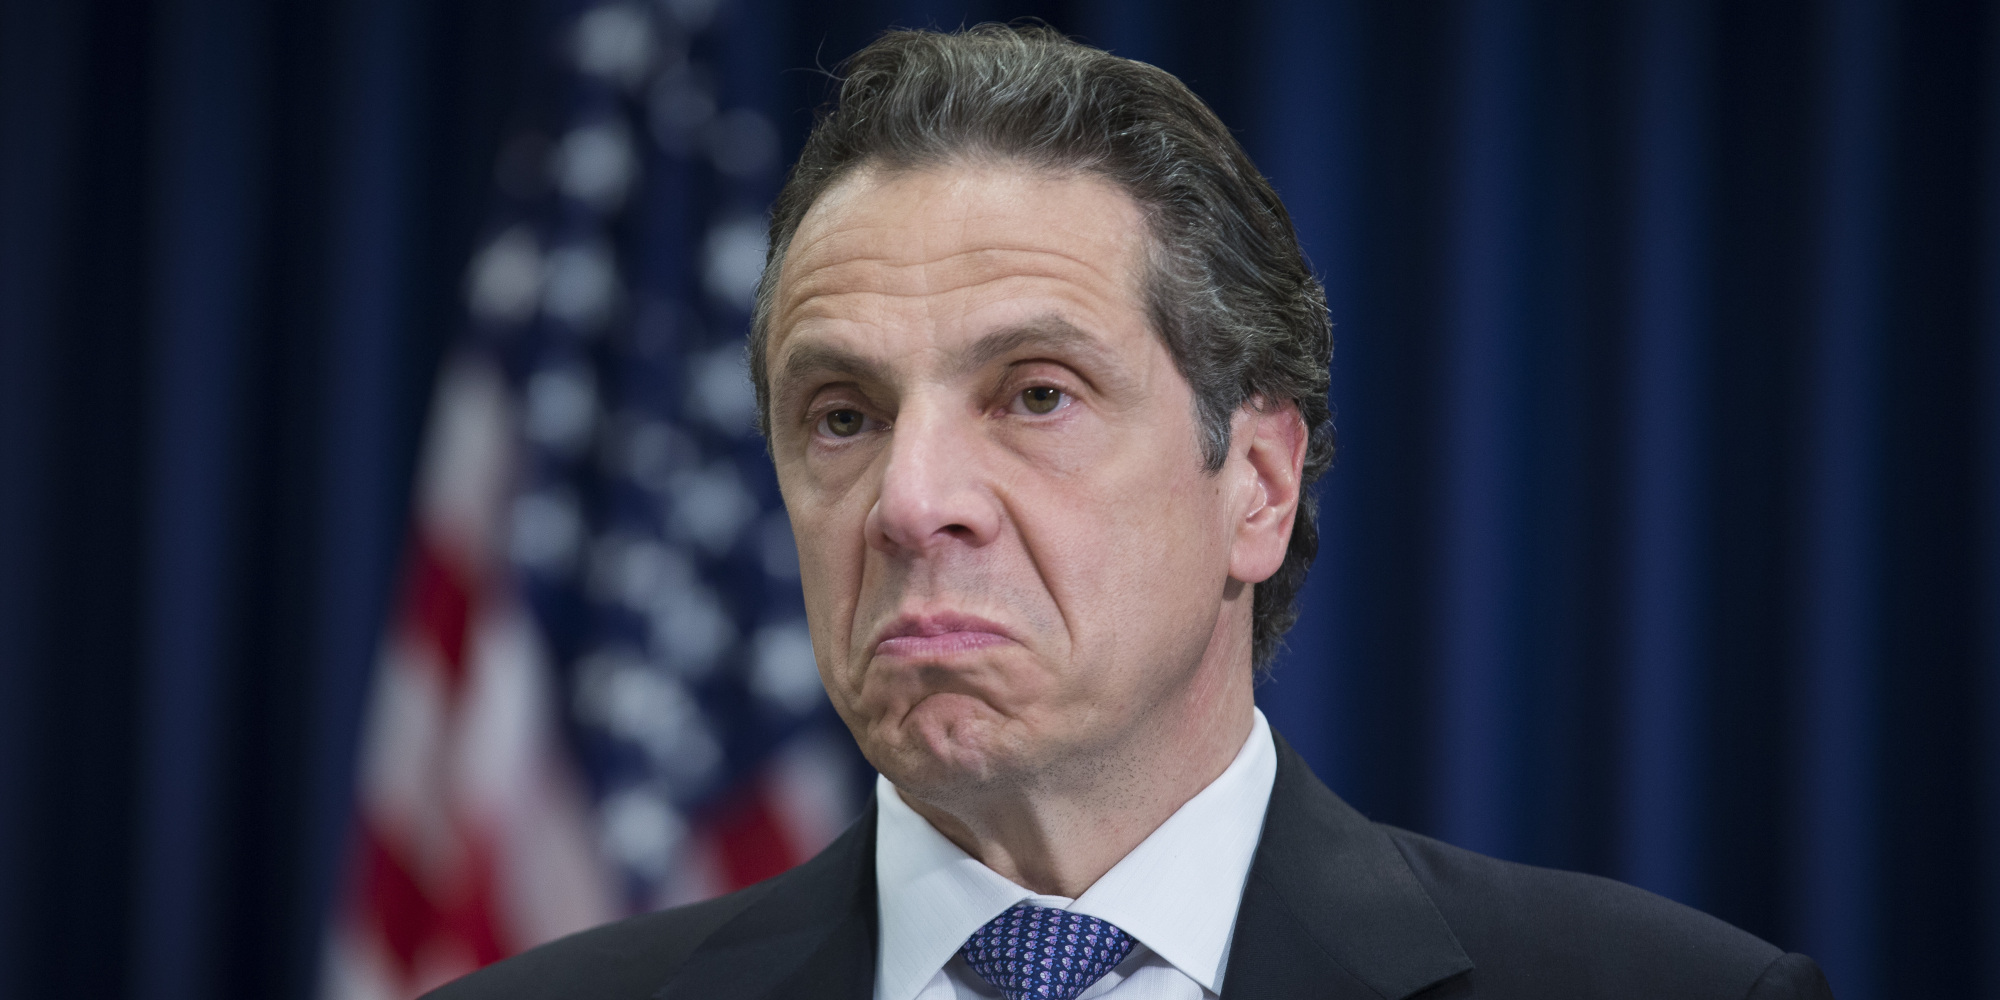 Democrats Pursuing Andrew Cuomo for Lying About Death Counts as Covid Anal Swab Goes Viral